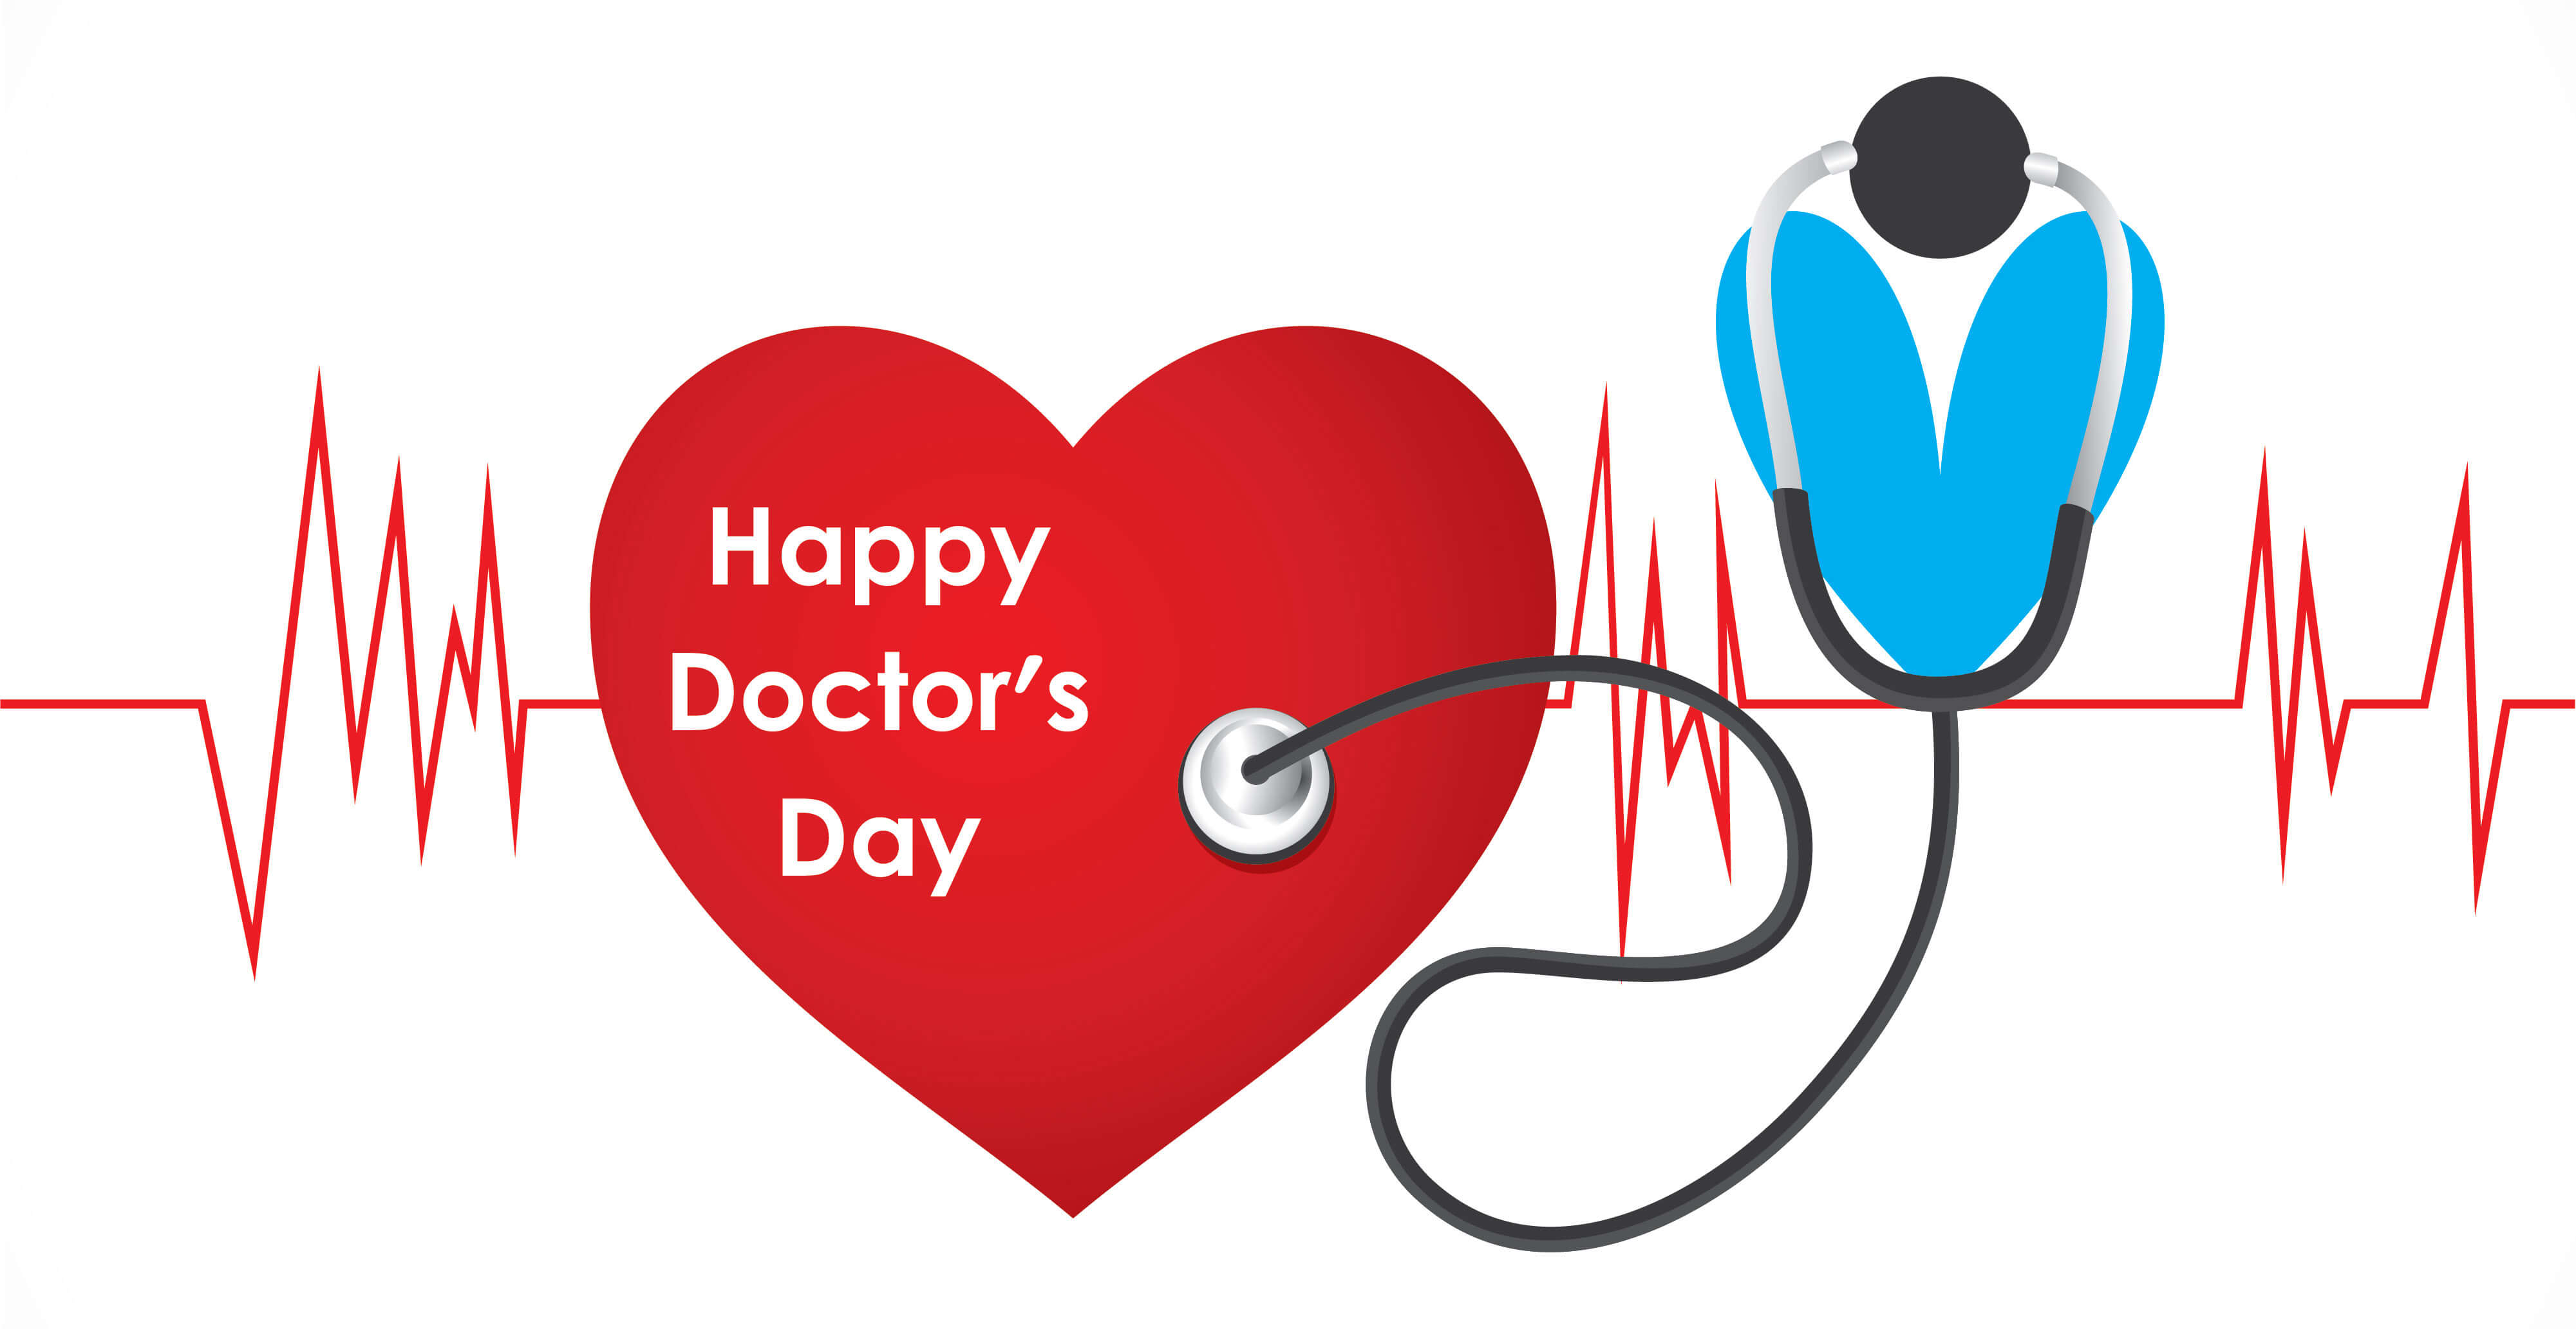 National Doctors Day 2020. Quotes, Image, Wishes & Messages